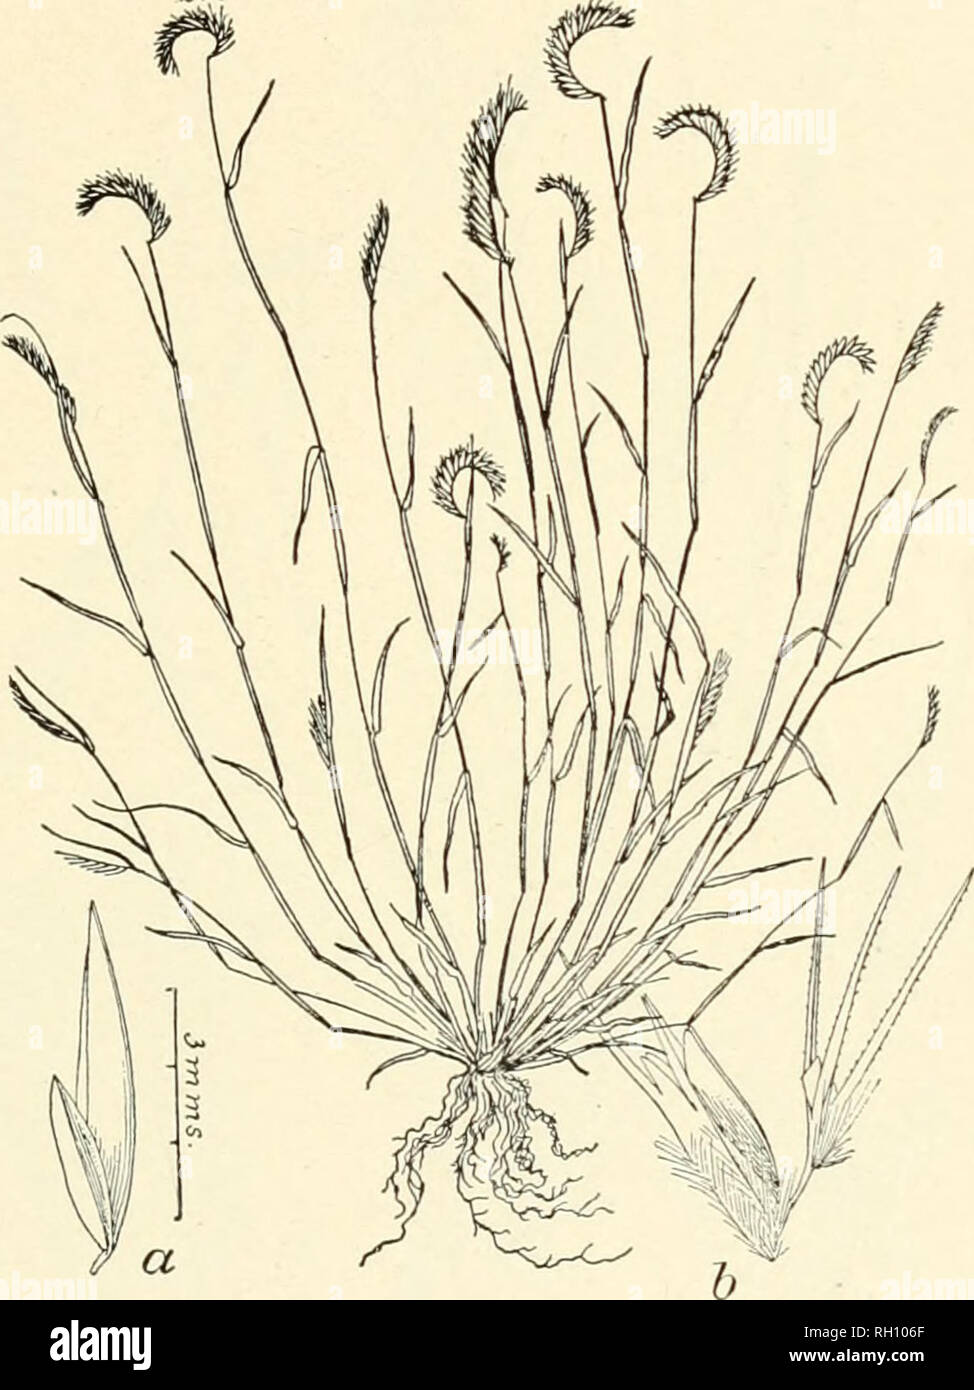 . Bulletin. Gramineae -- United States; Forage plants -- United States. 205. Fig. 501. Bouteloua piostrata Lag. Varied. Cienc. 2^ : 141. 1805. Tufted Gra^nia.—A 8len&lt;ler, tufted annual, 1 to 2 dm. high, with short, narrow leaves and solitary, curved, terminal spikes 1.5 to 2 cm. long. Spikelets witli very unequal, glabrous empty glumes (a), the second about 4 mm. long, and broadly oblong, 3-lobed and 3-awned flowering glumes which are pubescent on the back below.—Common on bottom lauds, New Mexico, Colo- rado, and (?) Arizona. [Mexico.] June-October.. Please note that these images are extra Stock Photo